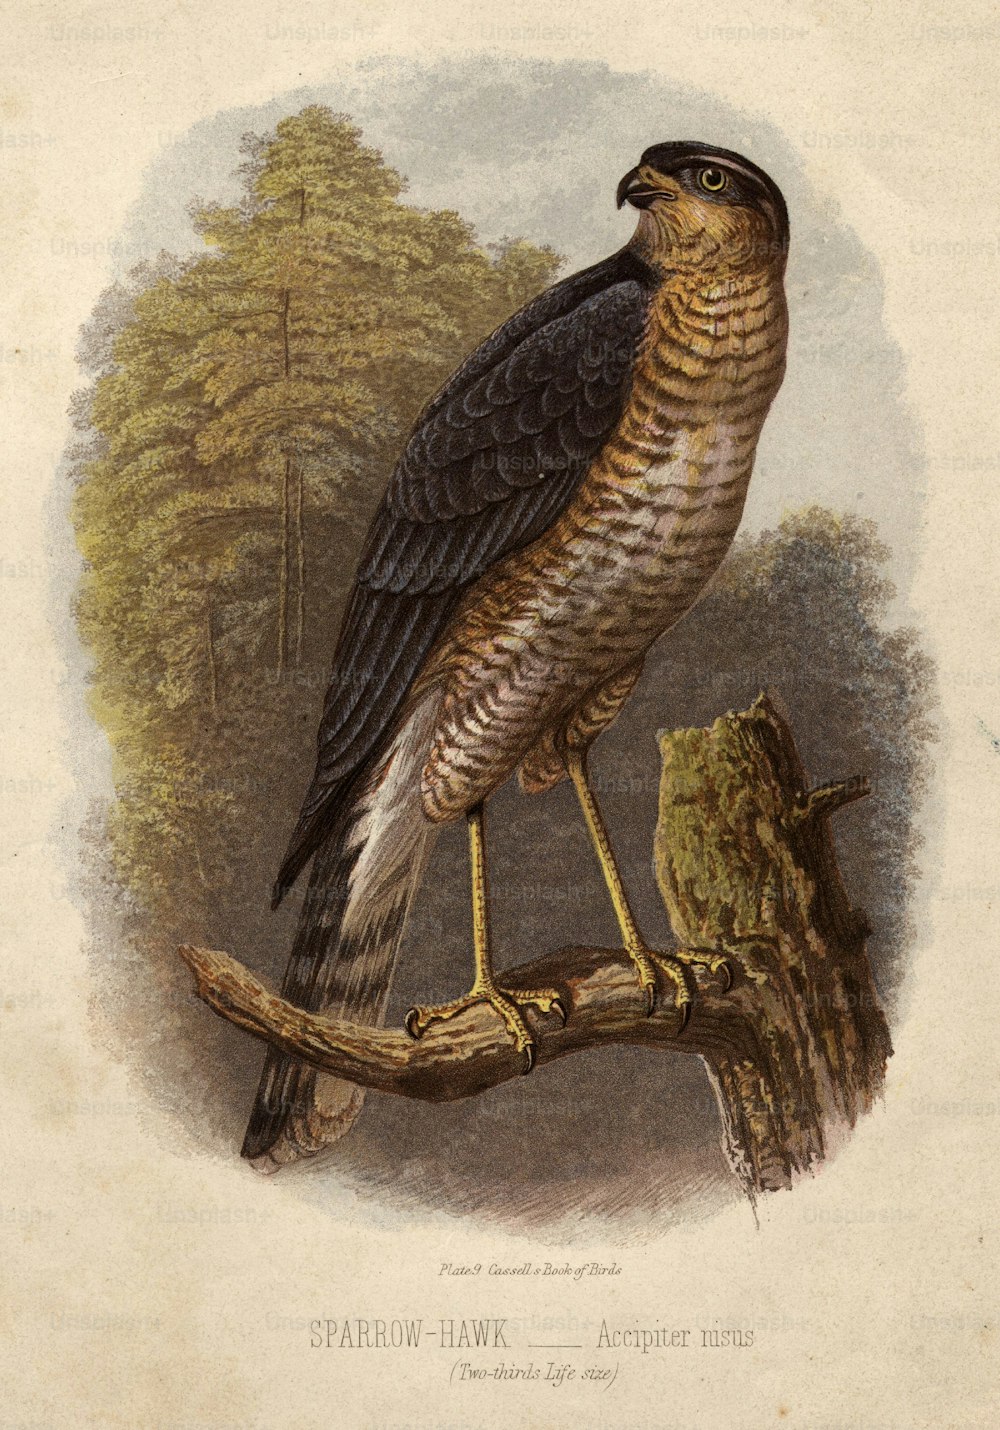 circa 1900:  Accipiter nisus, the sparrow hawk.  Cassel's Book of Birds  (Photo by Hulton Archive/Getty Images)